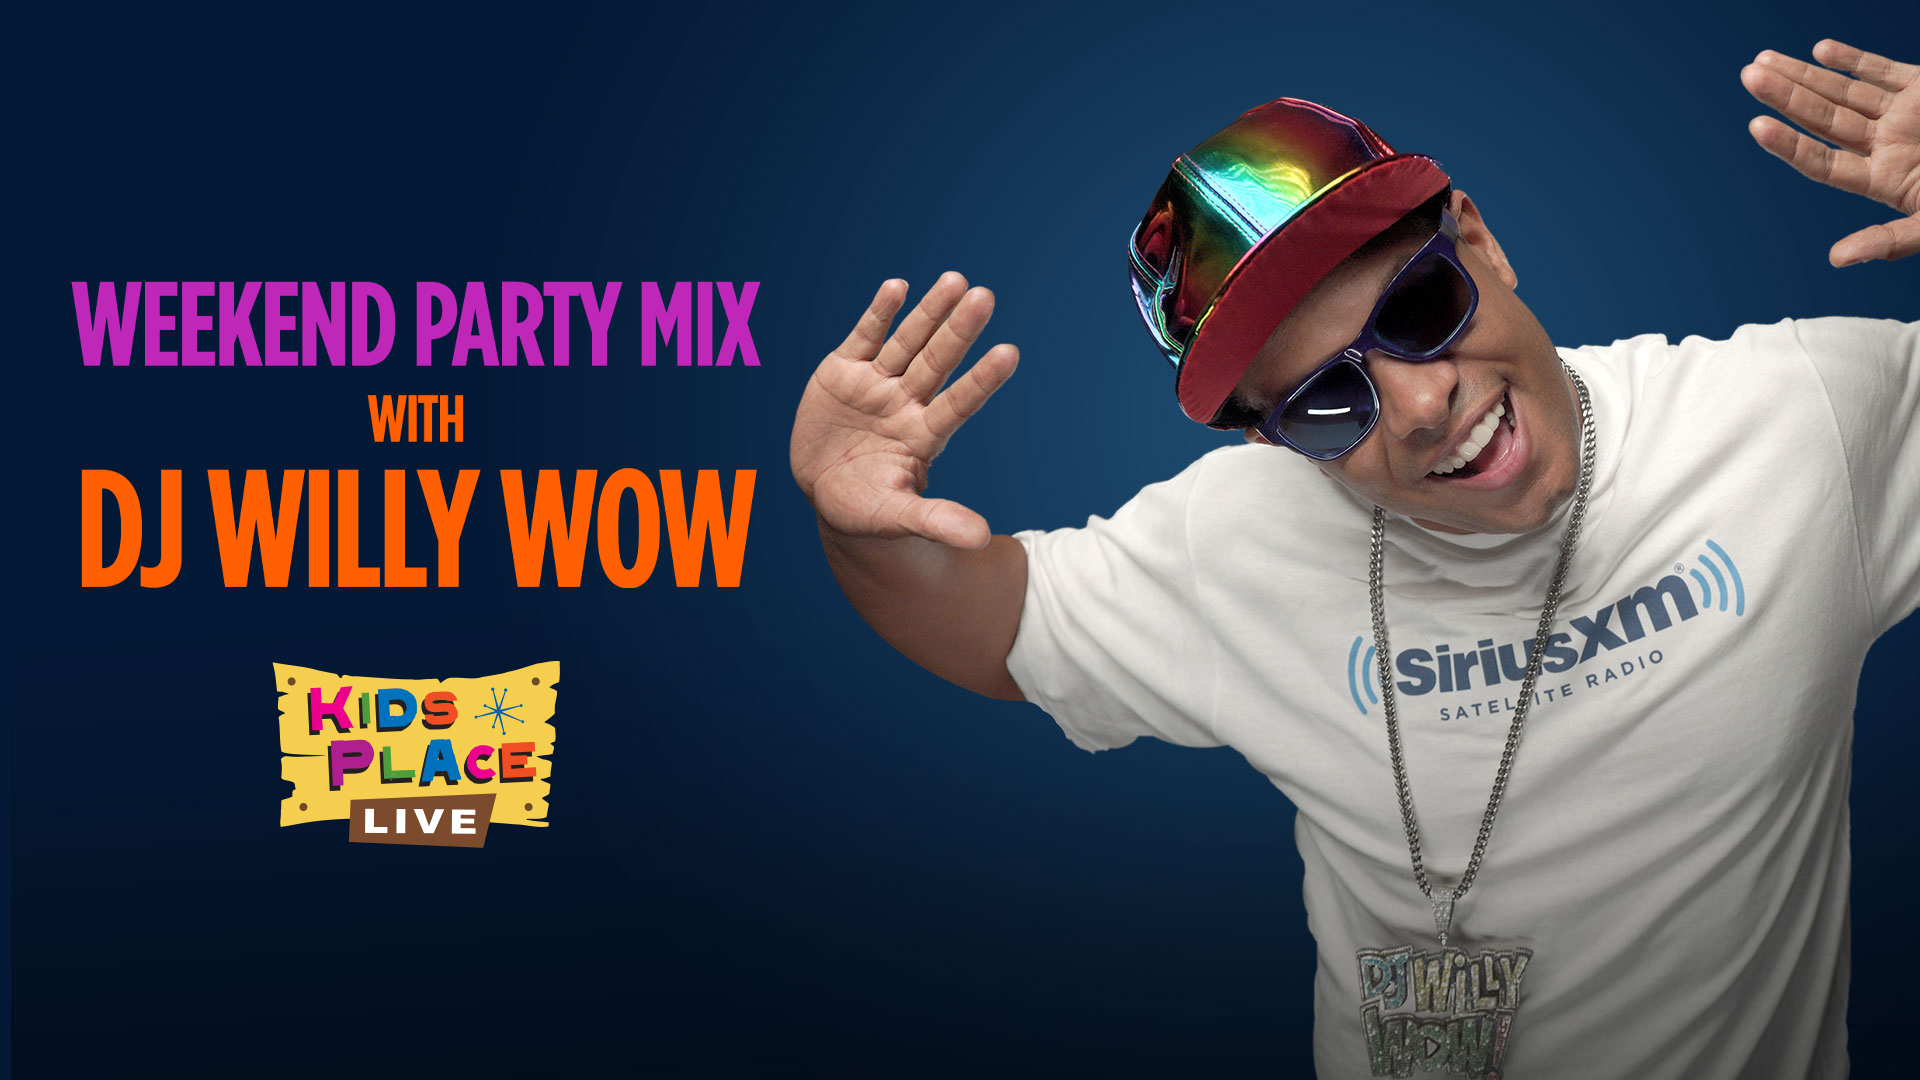 SiriusXM Kids Place Live Weekend Party Mix with DJ Willy Wow